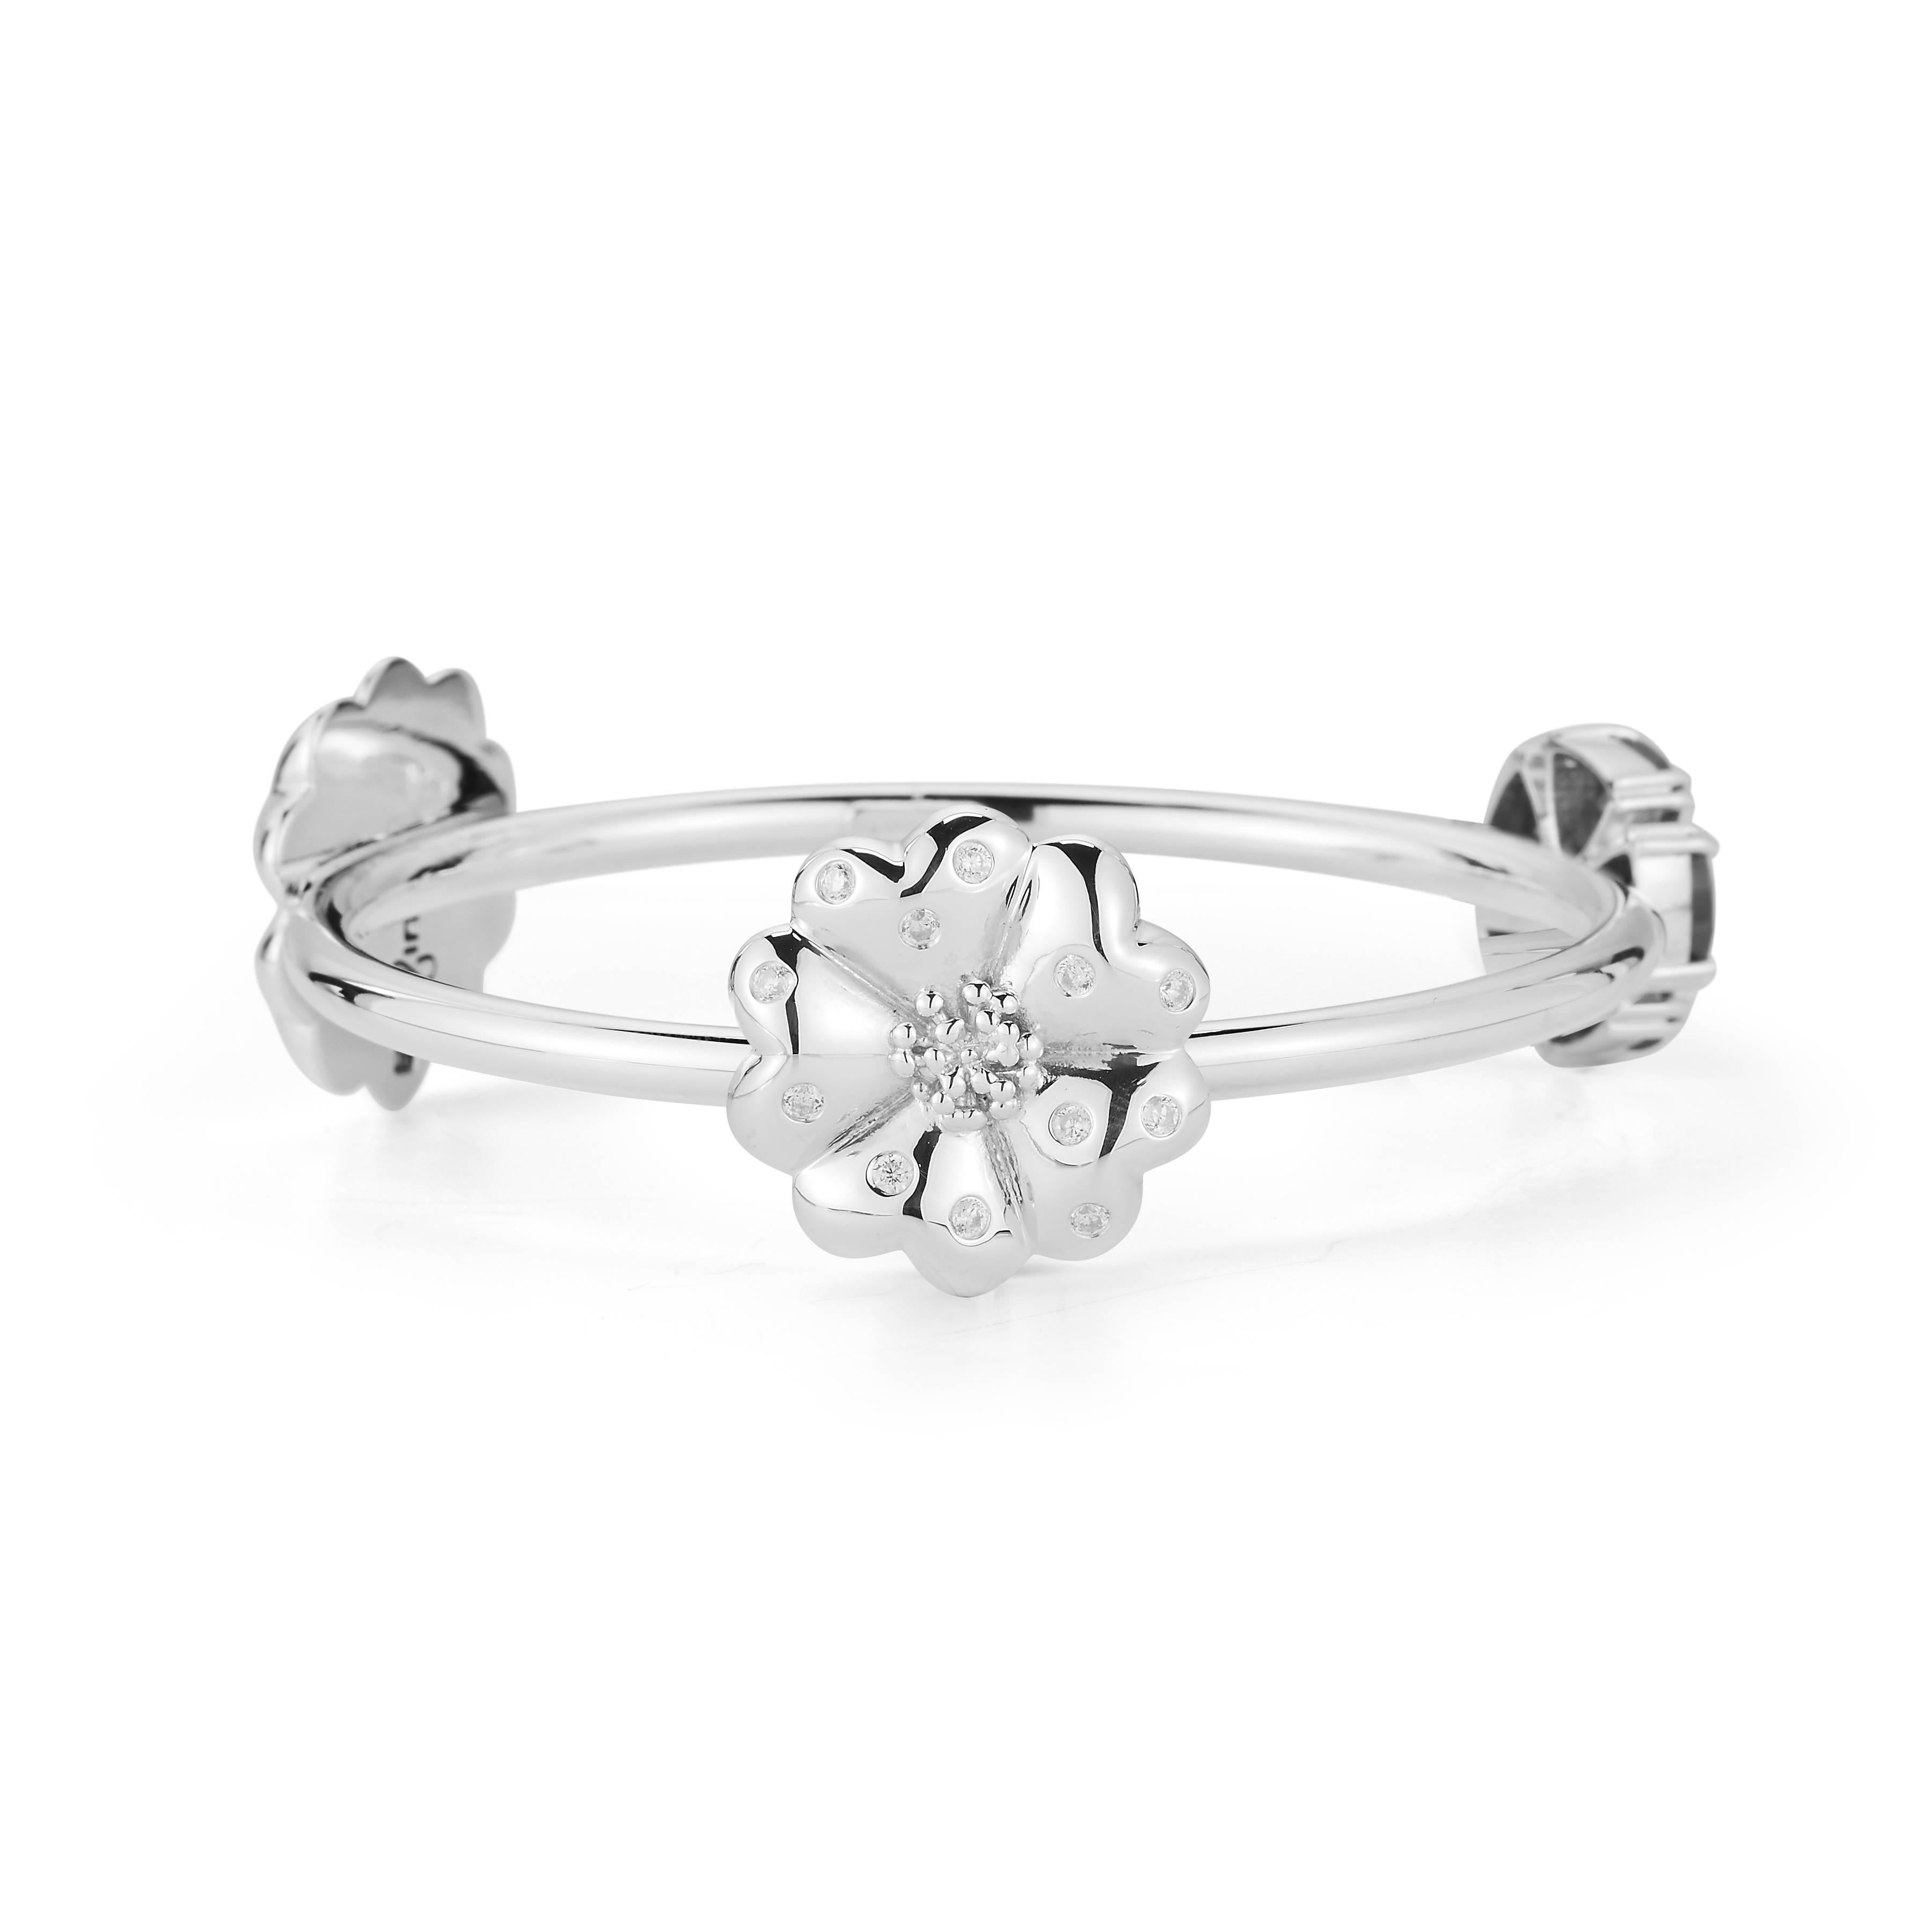 Designed in NYC

.925 Sterling Silver 5 x 7 mm White Sapphire Mixed Blossom Stone Bangle. No matter the season, allow natural beauty to surround you wherever you go. Mixed blossom stone bangle: 

Sterling silver 
High-polish finish
Medium-weight 
3D